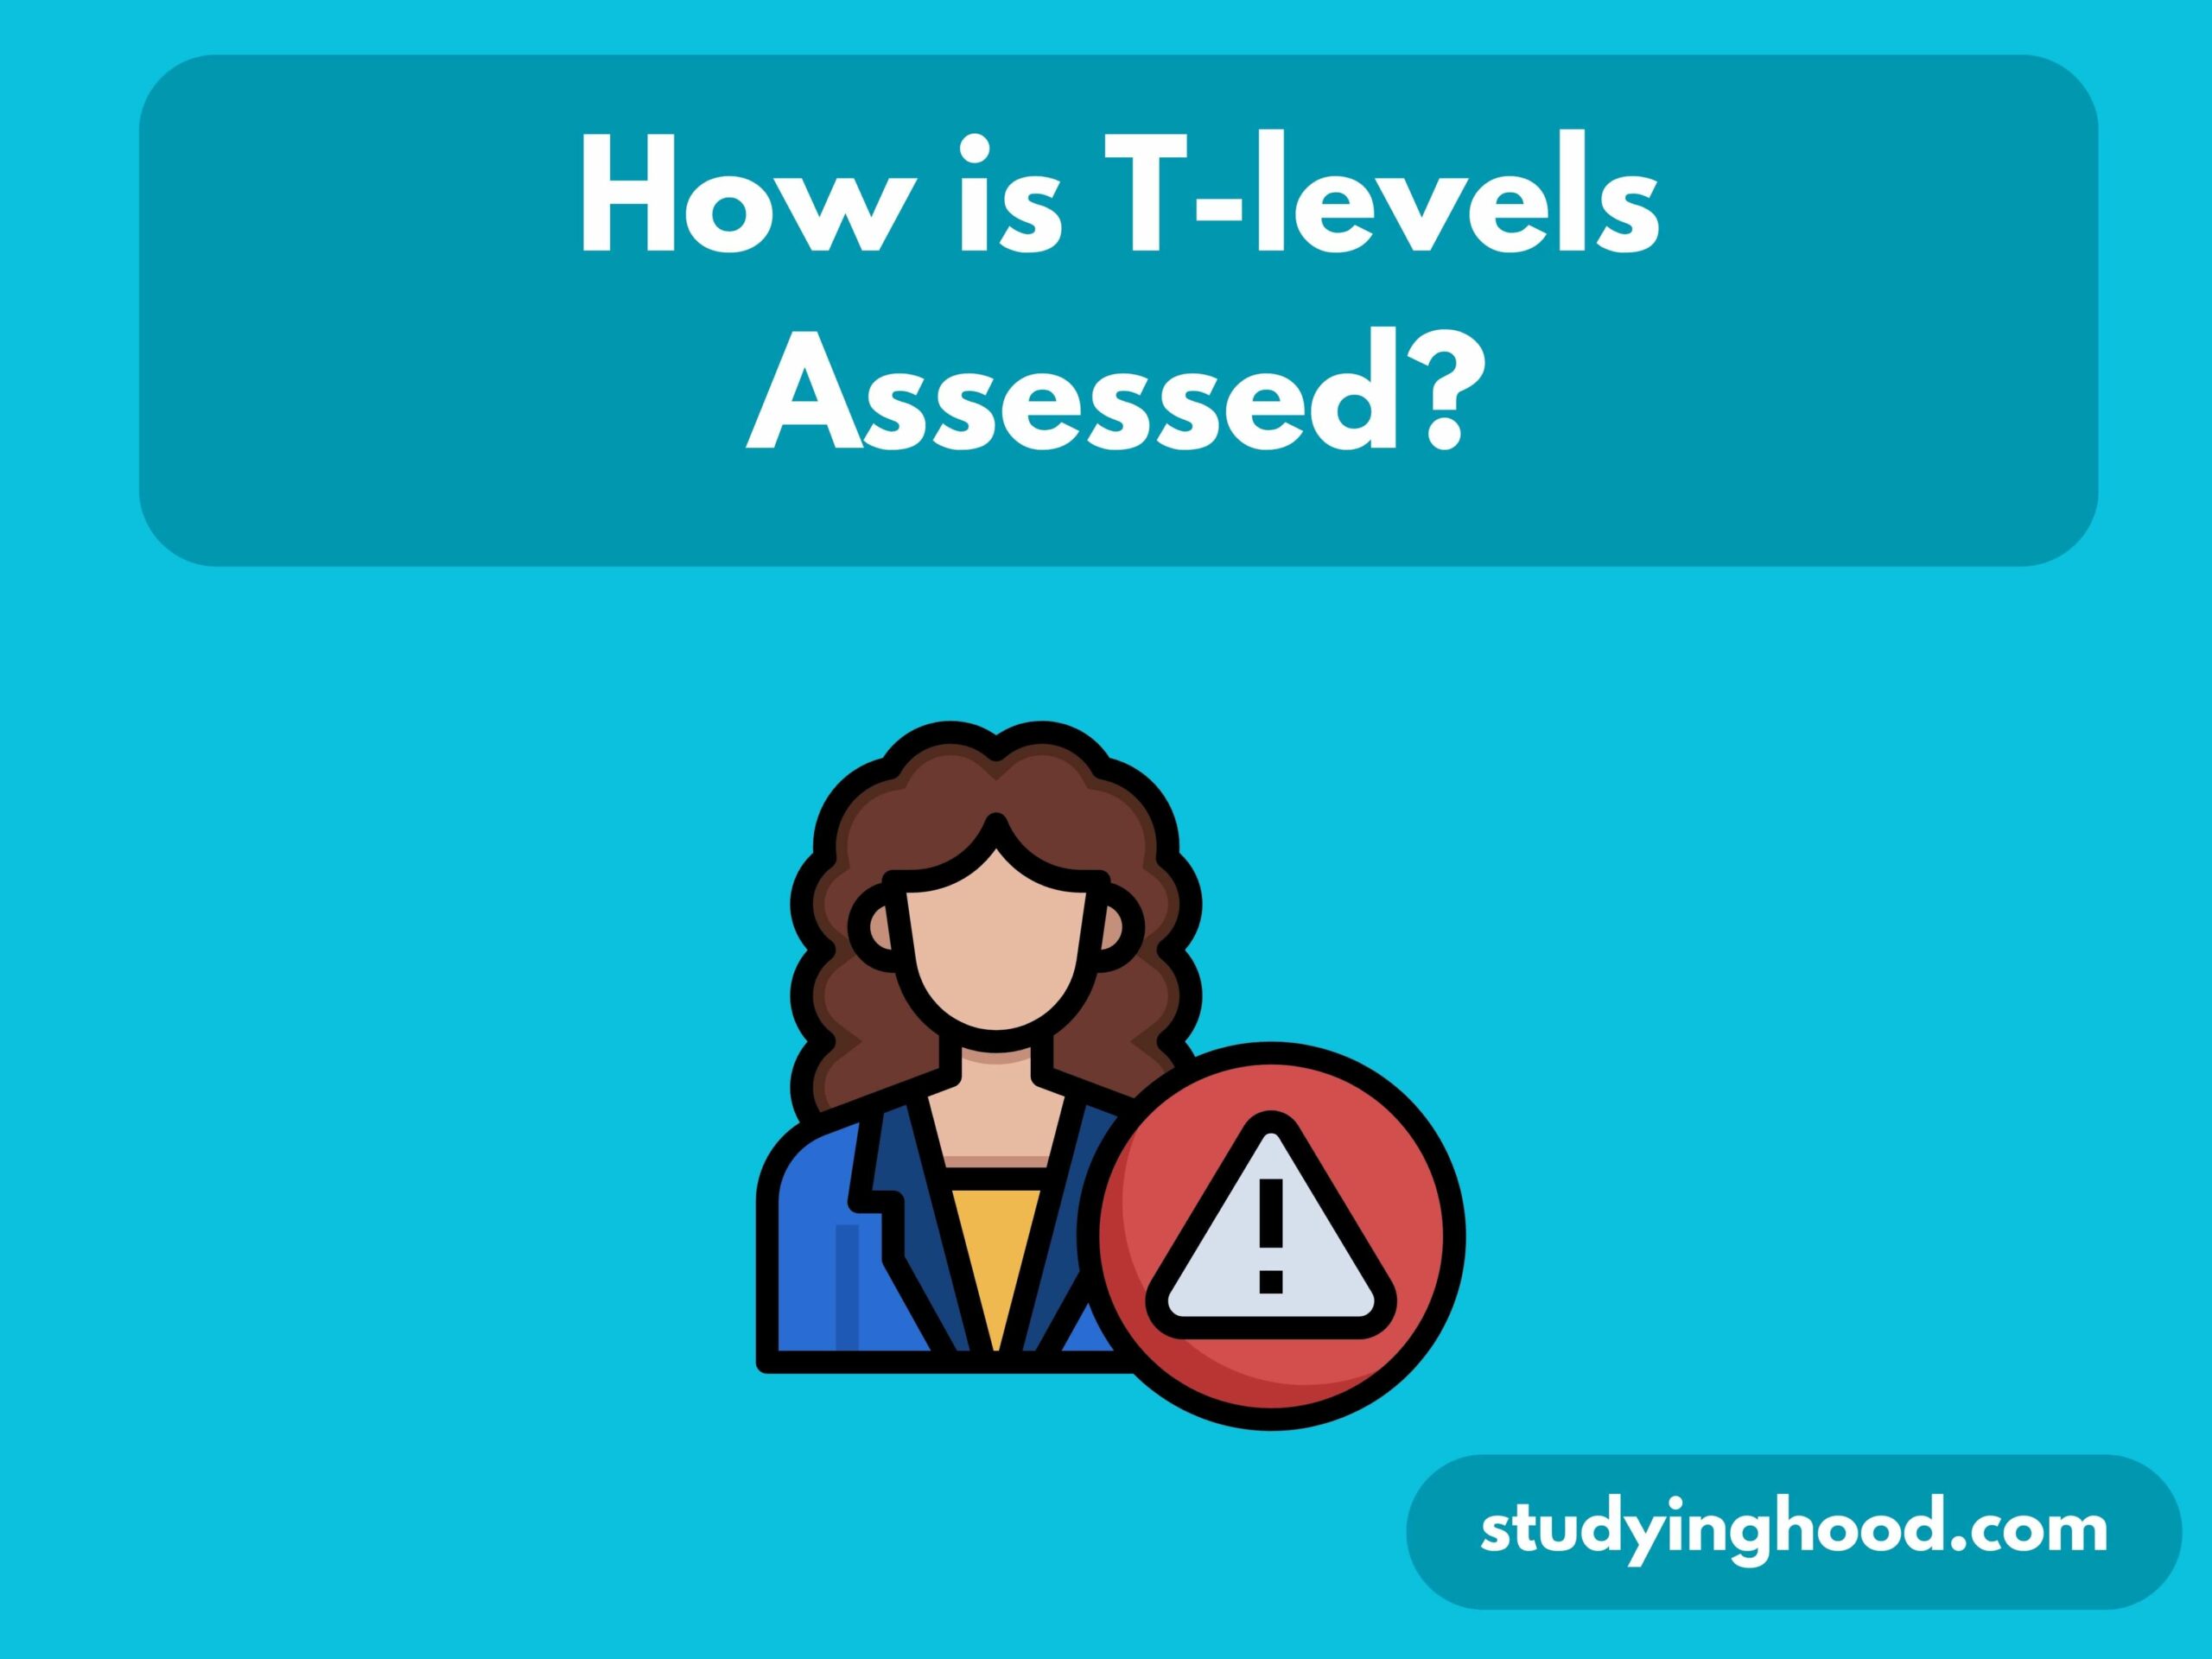 How is T-levels Assessed?